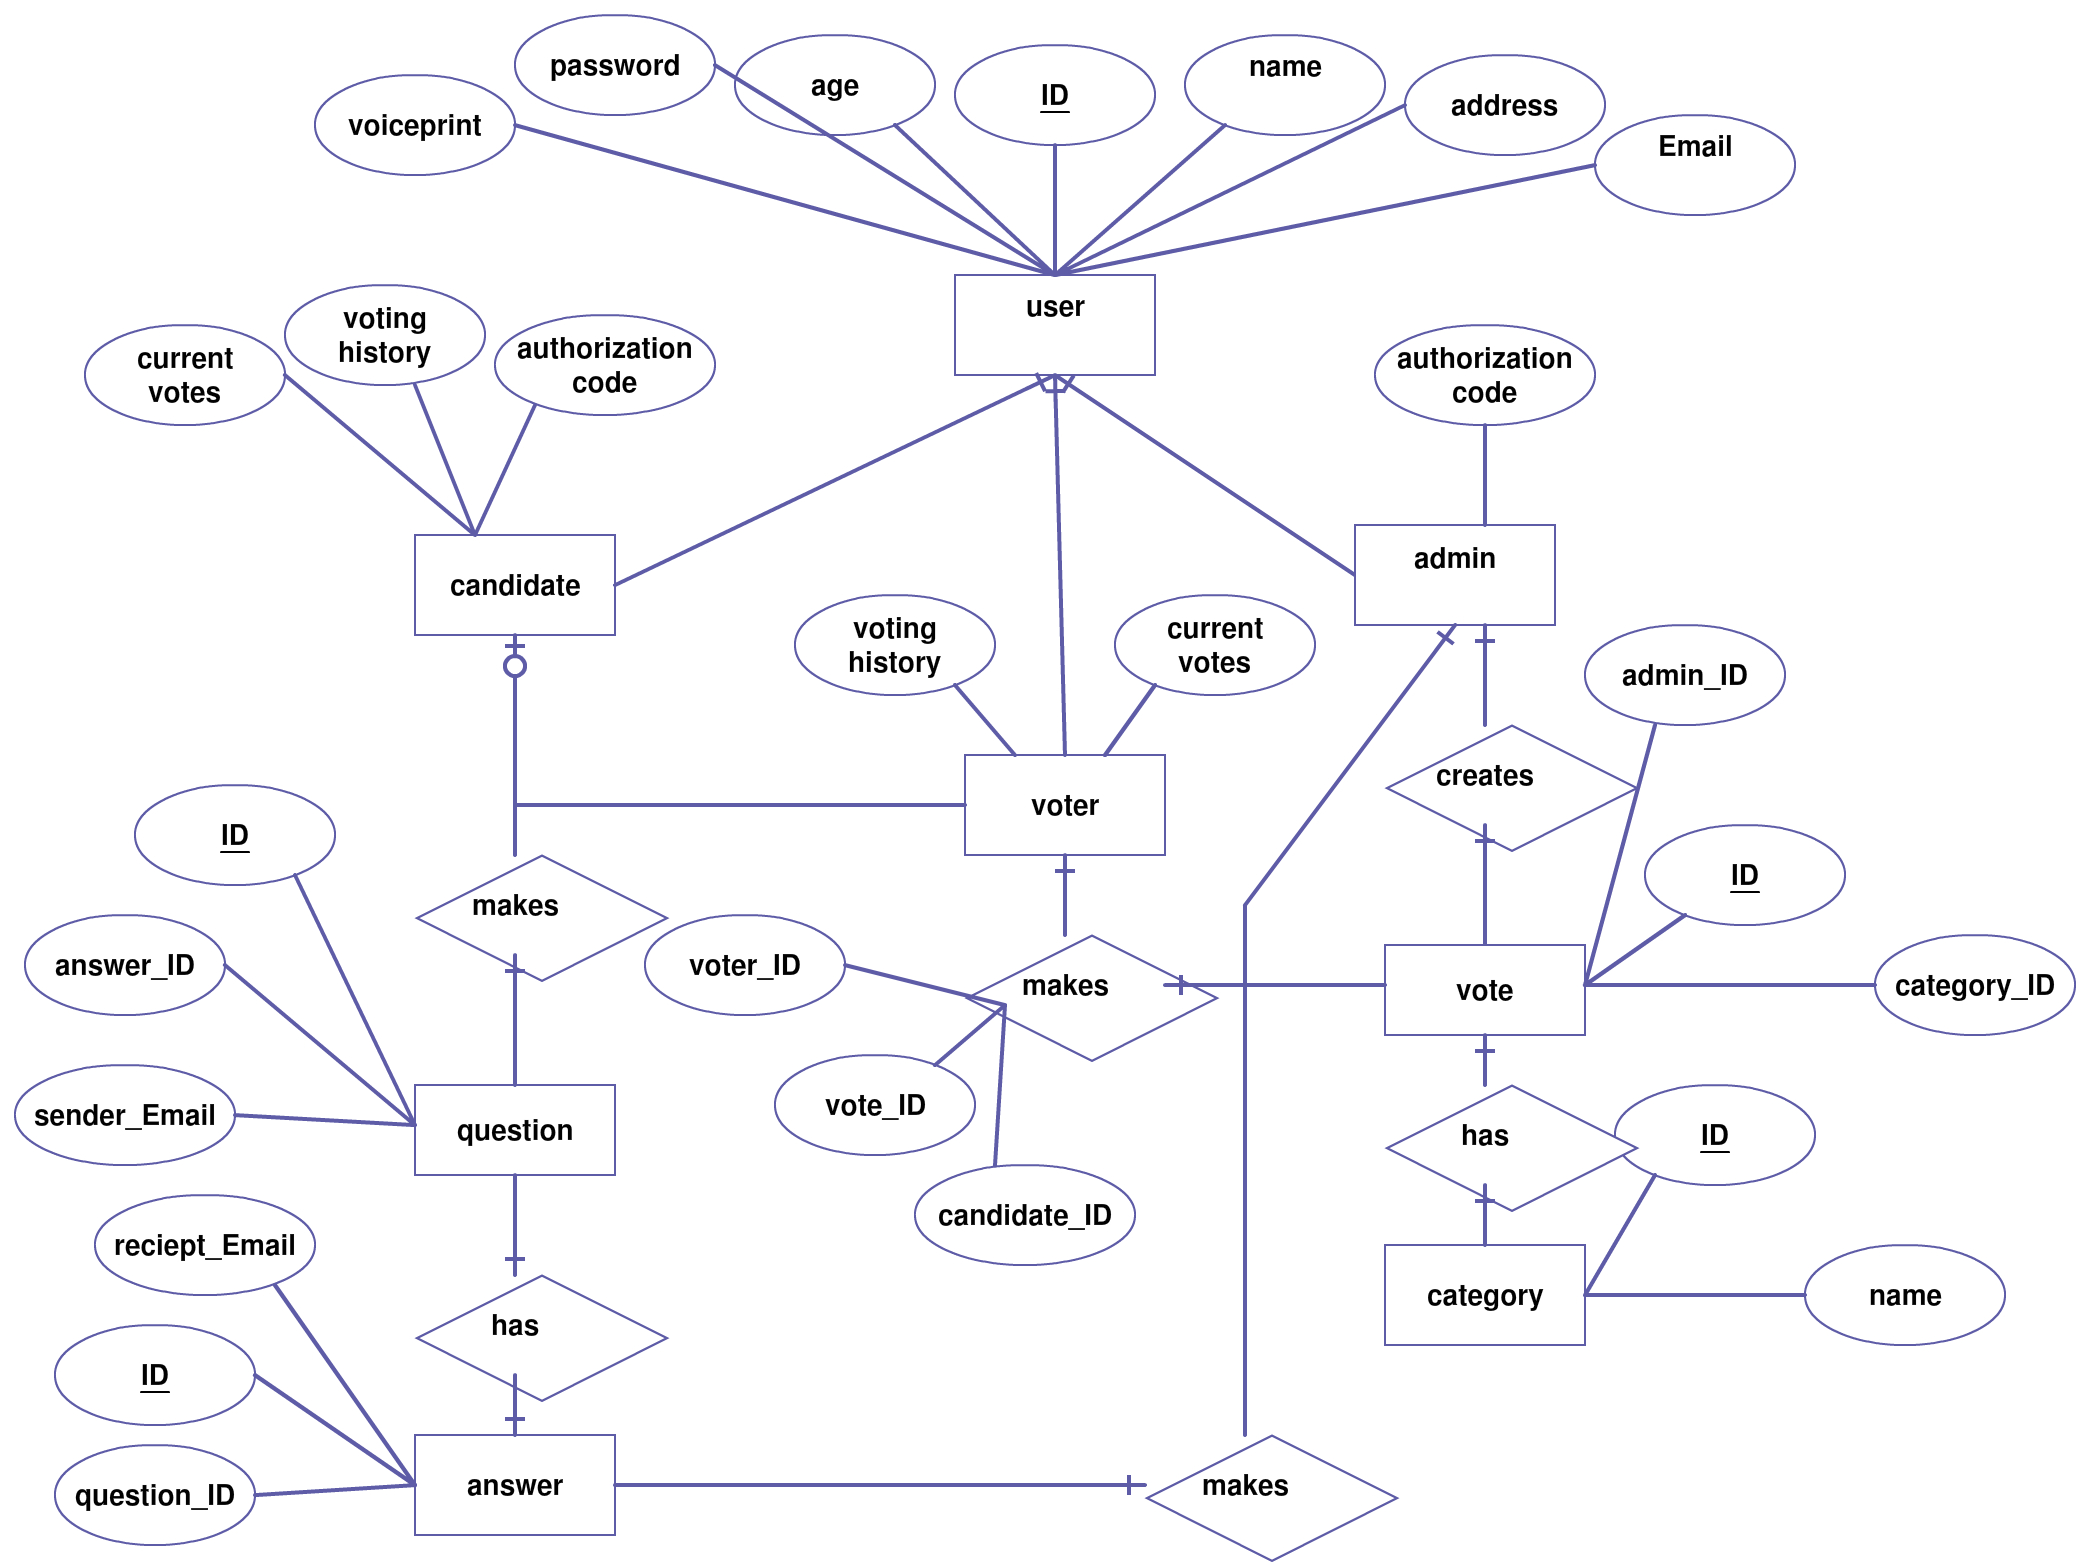 Pin On Entity Relationship Diagram Templates intended for Entity Relationship Diagram Meaning